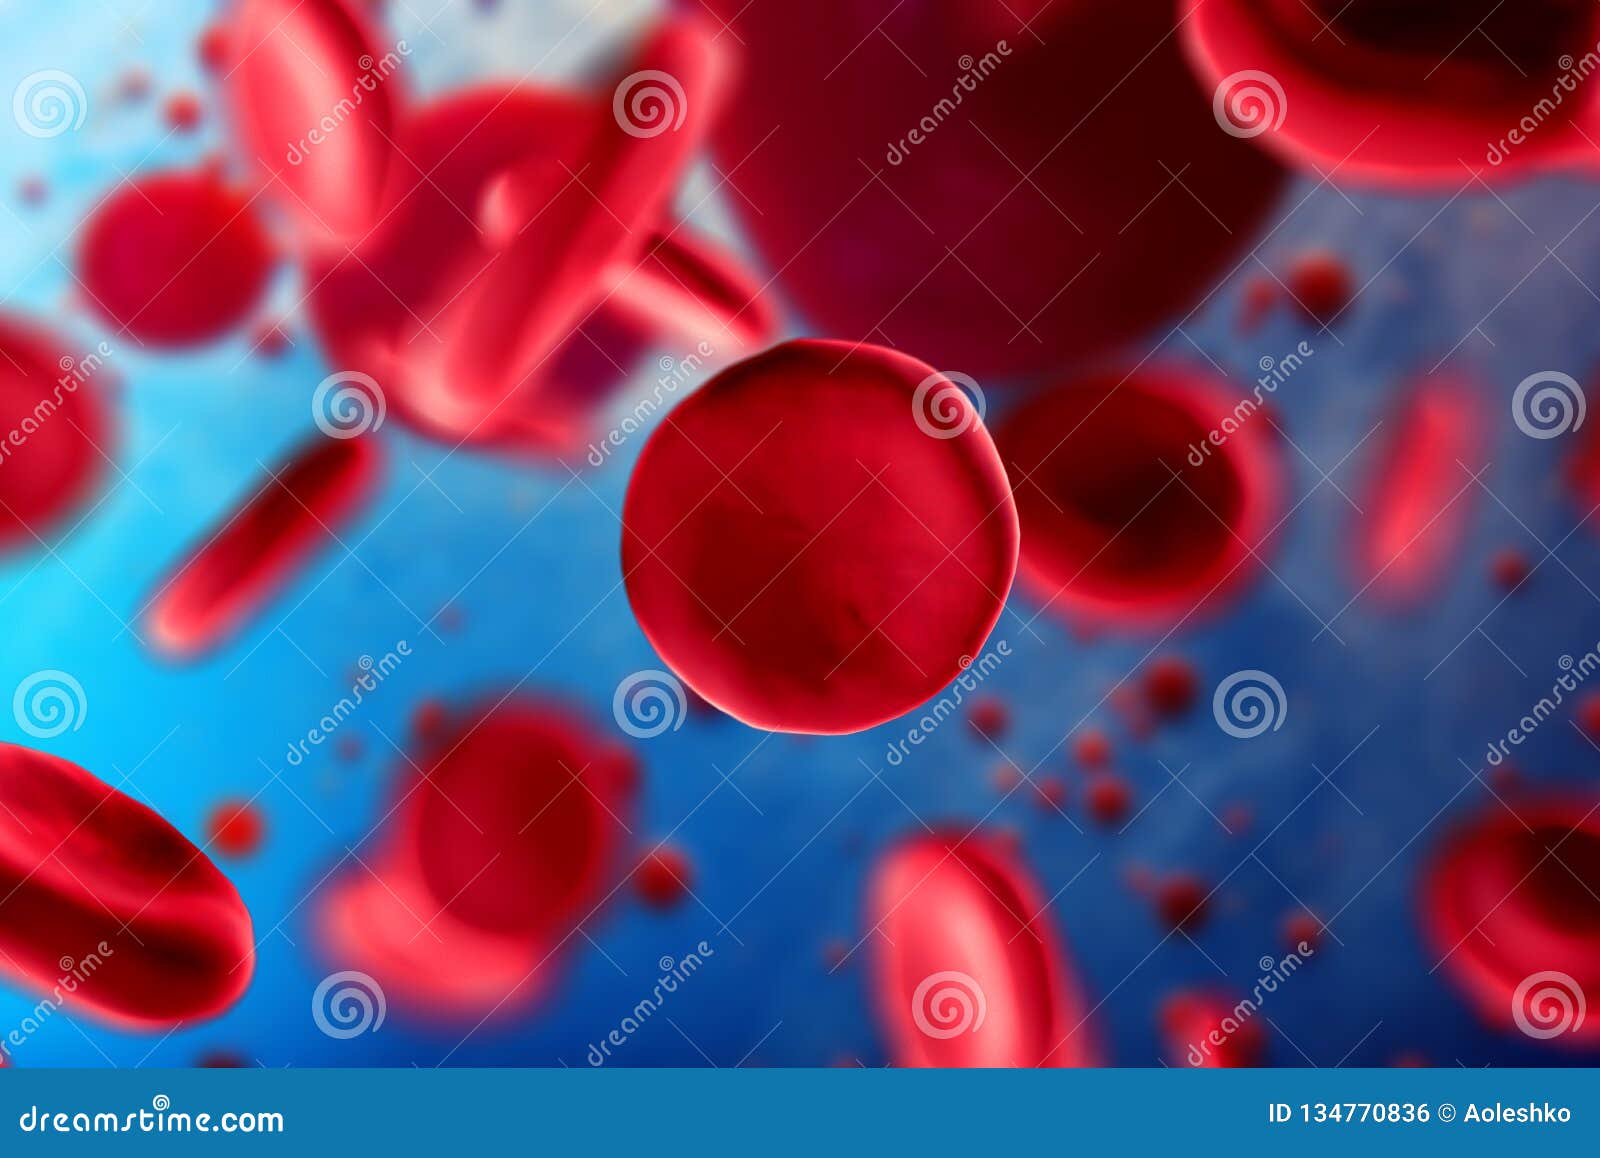 3d Illustration of Red Blood Cells Erythrocytes Under a Microscope ...